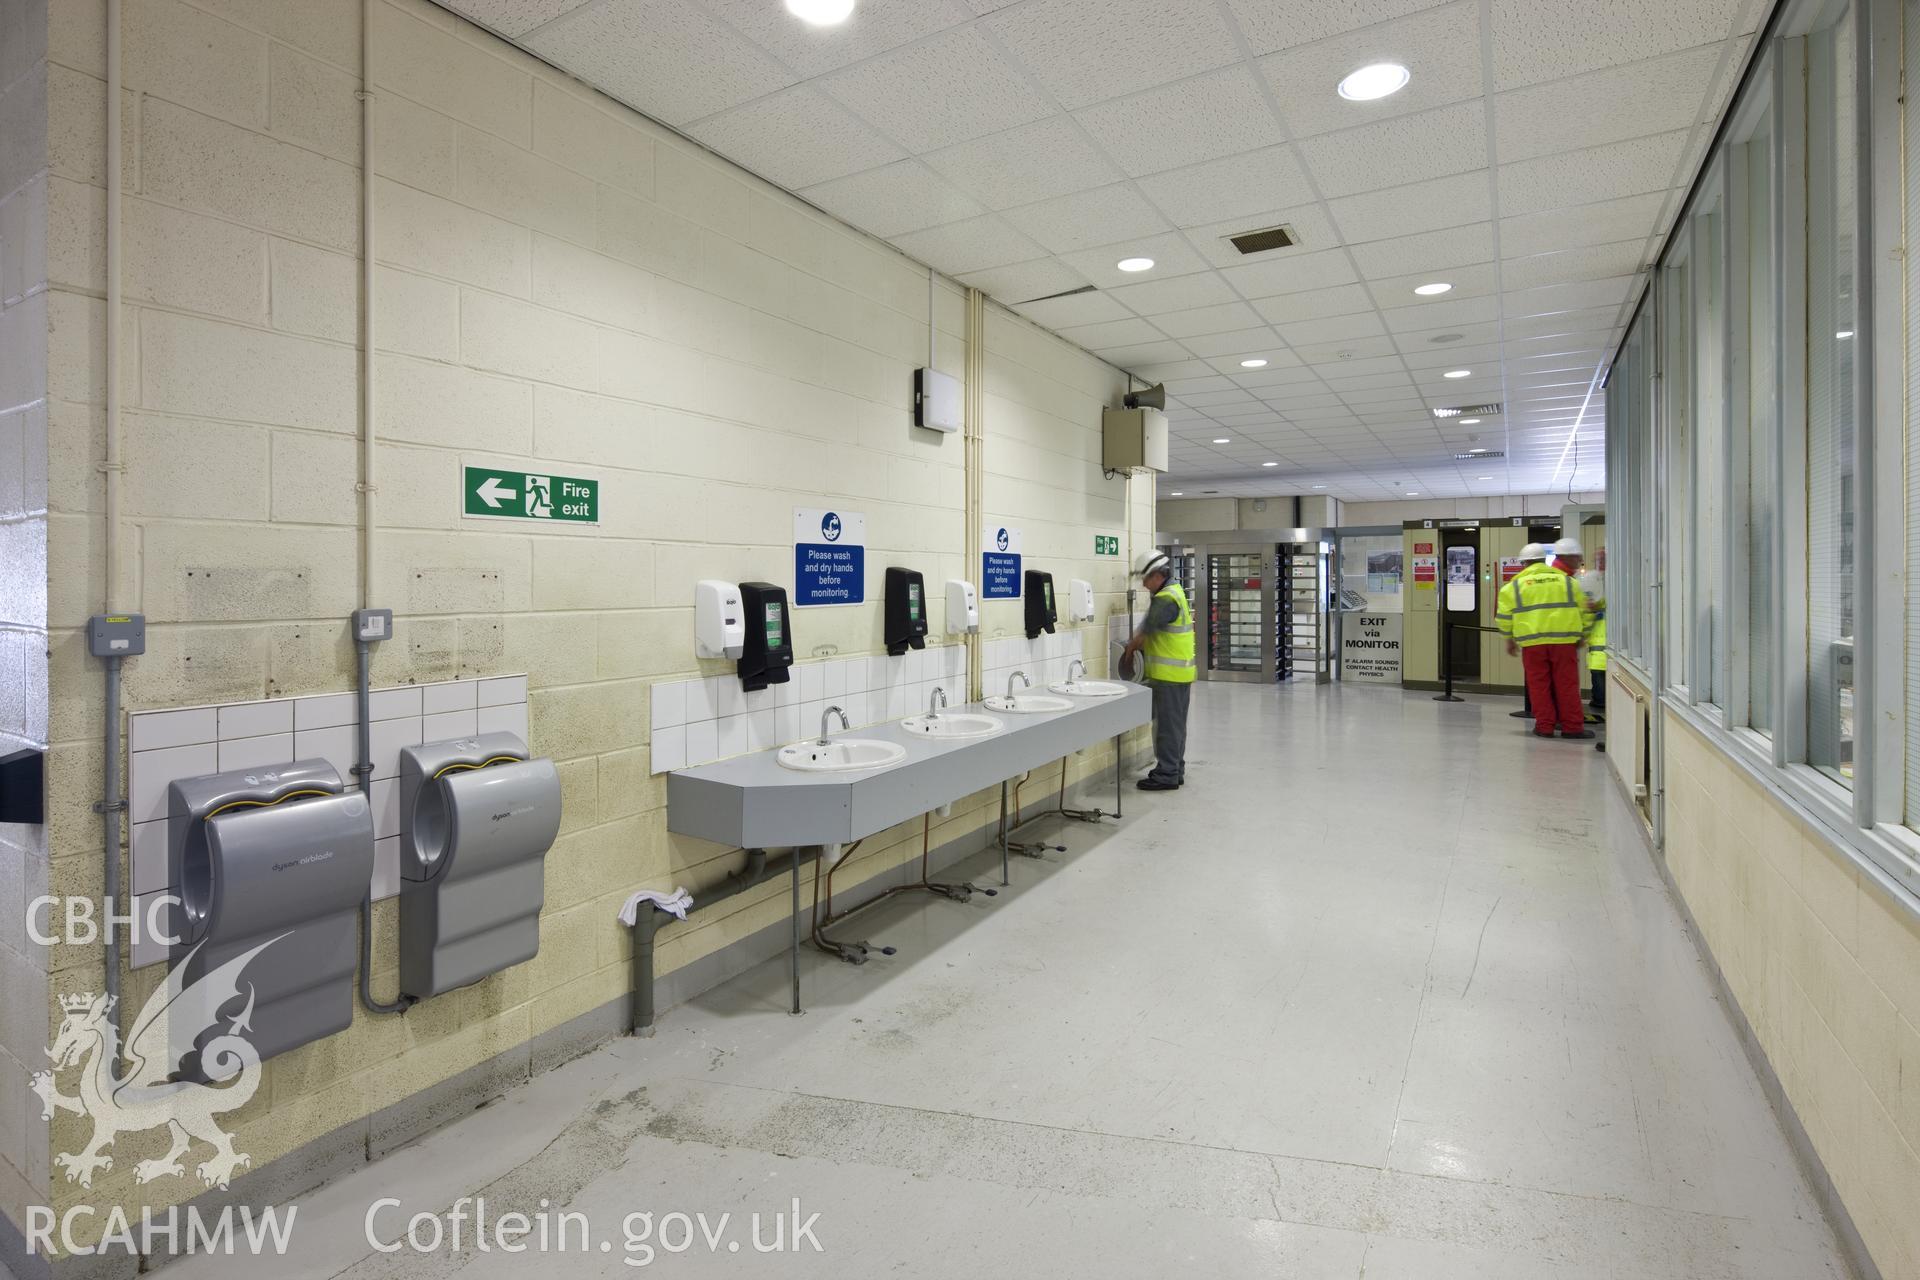 Hand dryers and basins. Workers must wash their hands when leaving (RCA) Radiation Controlled Areas.